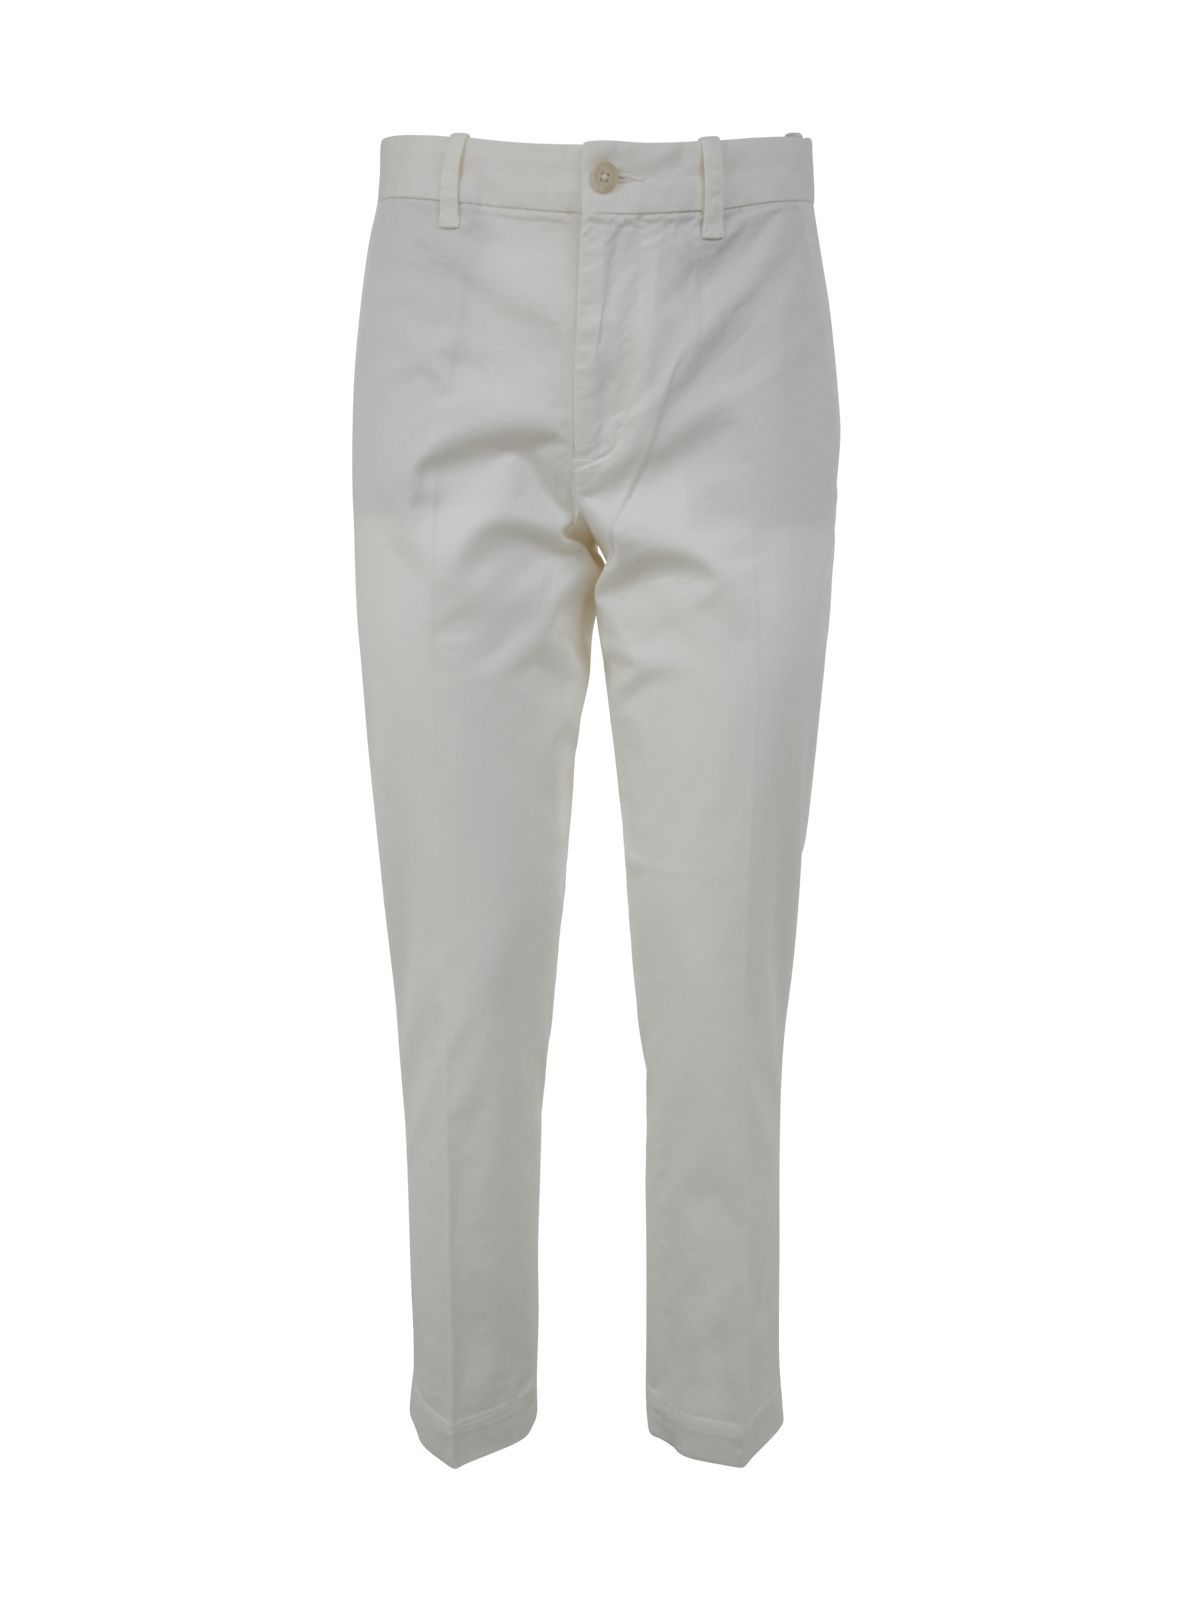 Polo Ralph Lauren Slim Chino Flat Front Ankle Trouser